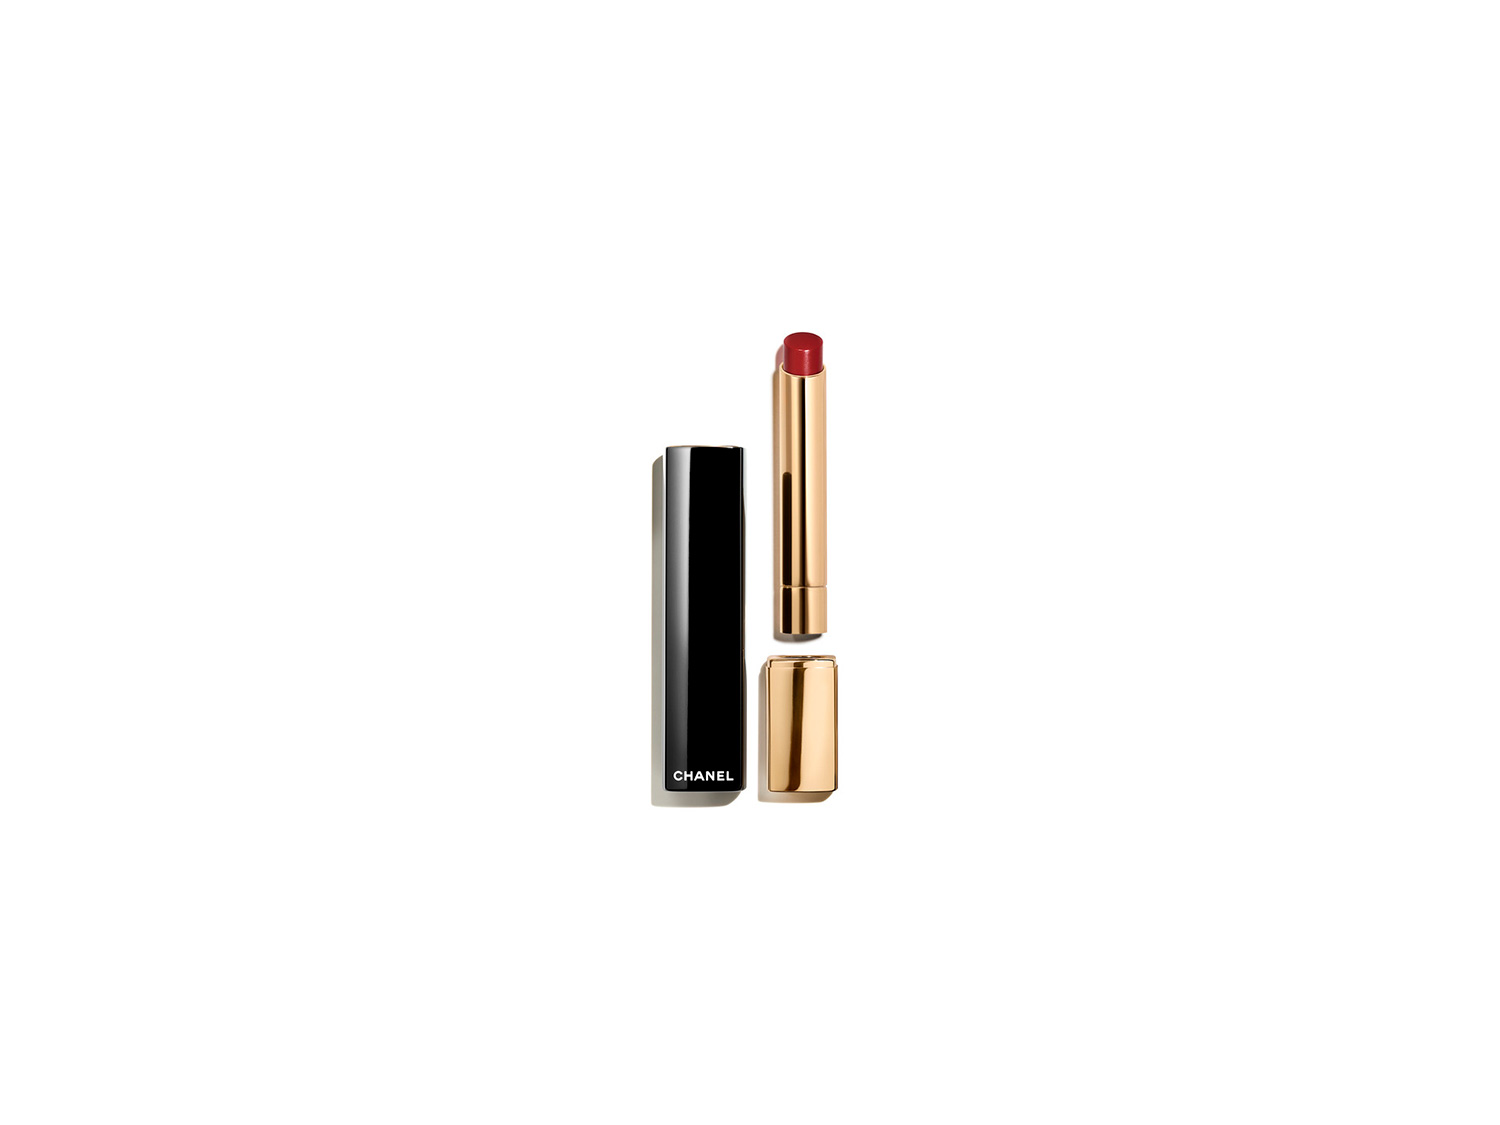 CHANEL Rouge Allure L'extreait